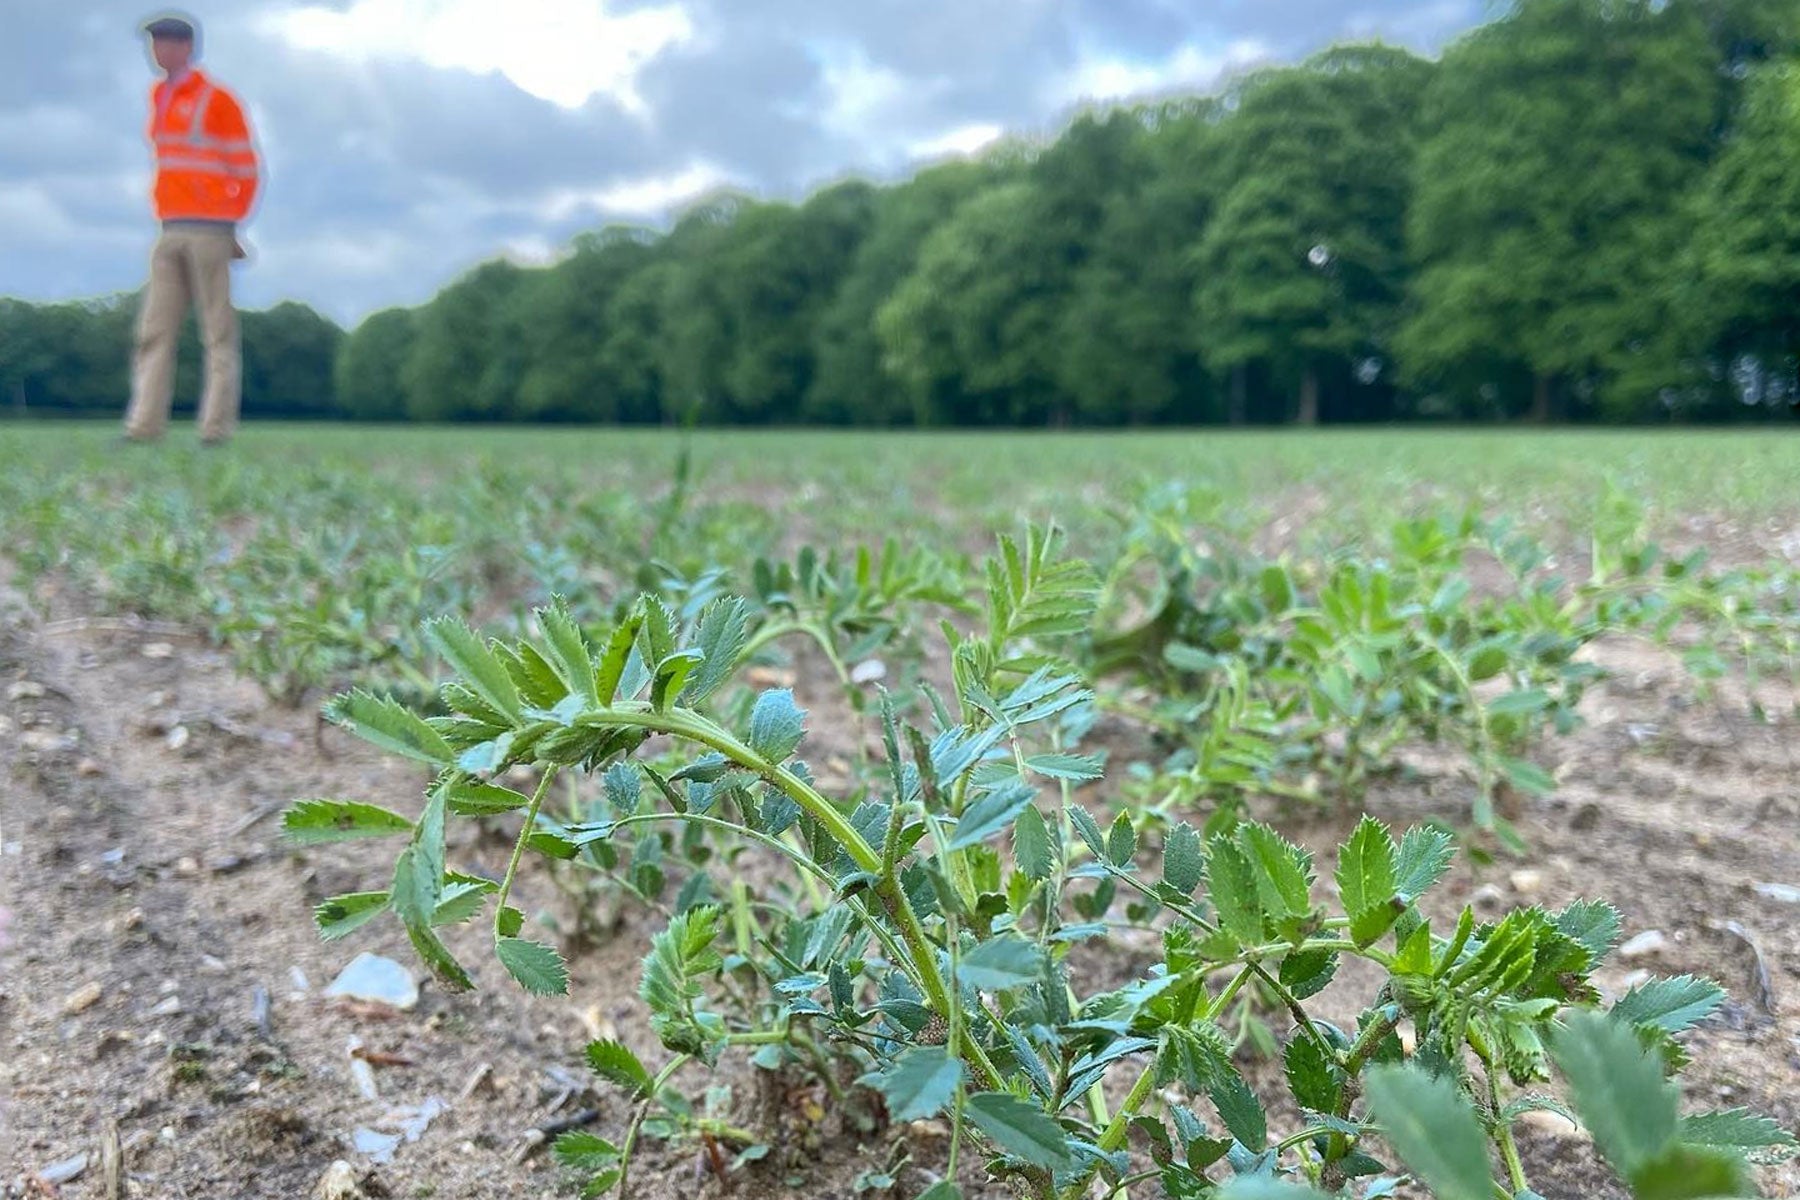 Norfolk Chickpeas in a Changing Climate